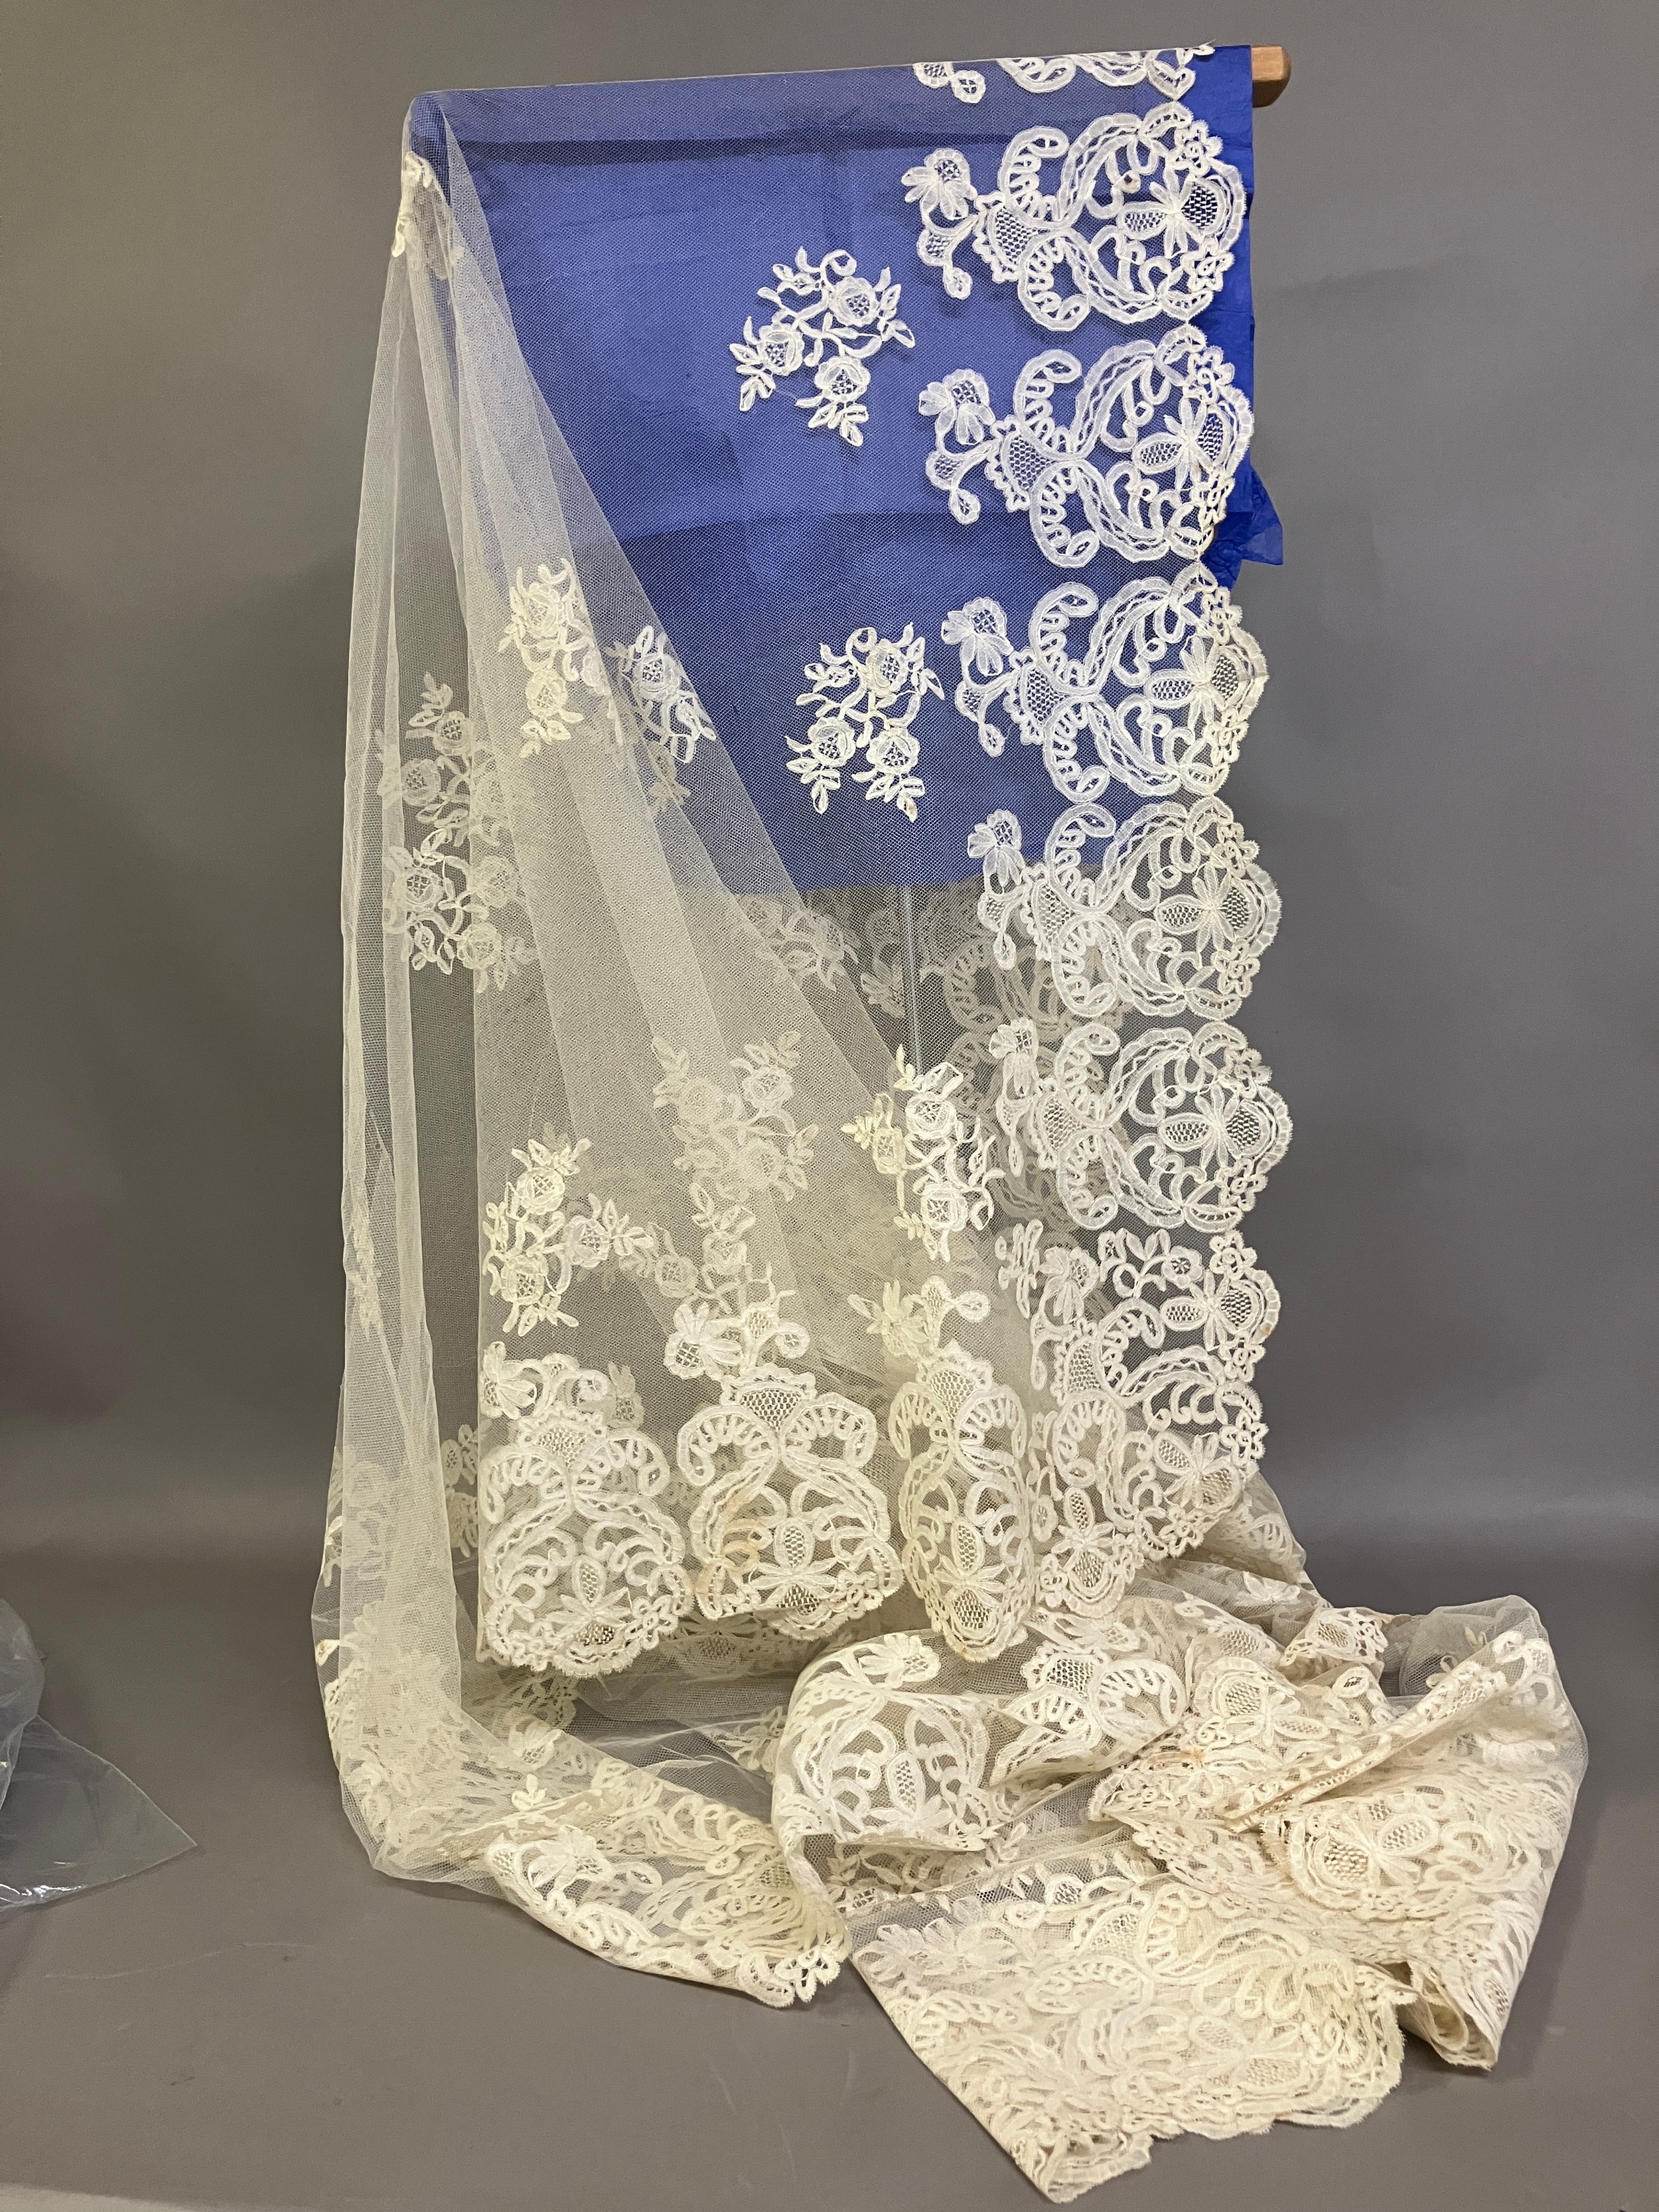 A very large and fine quality late 19th century wedding veil, Honiton Bobbin Appliqué, deep lace